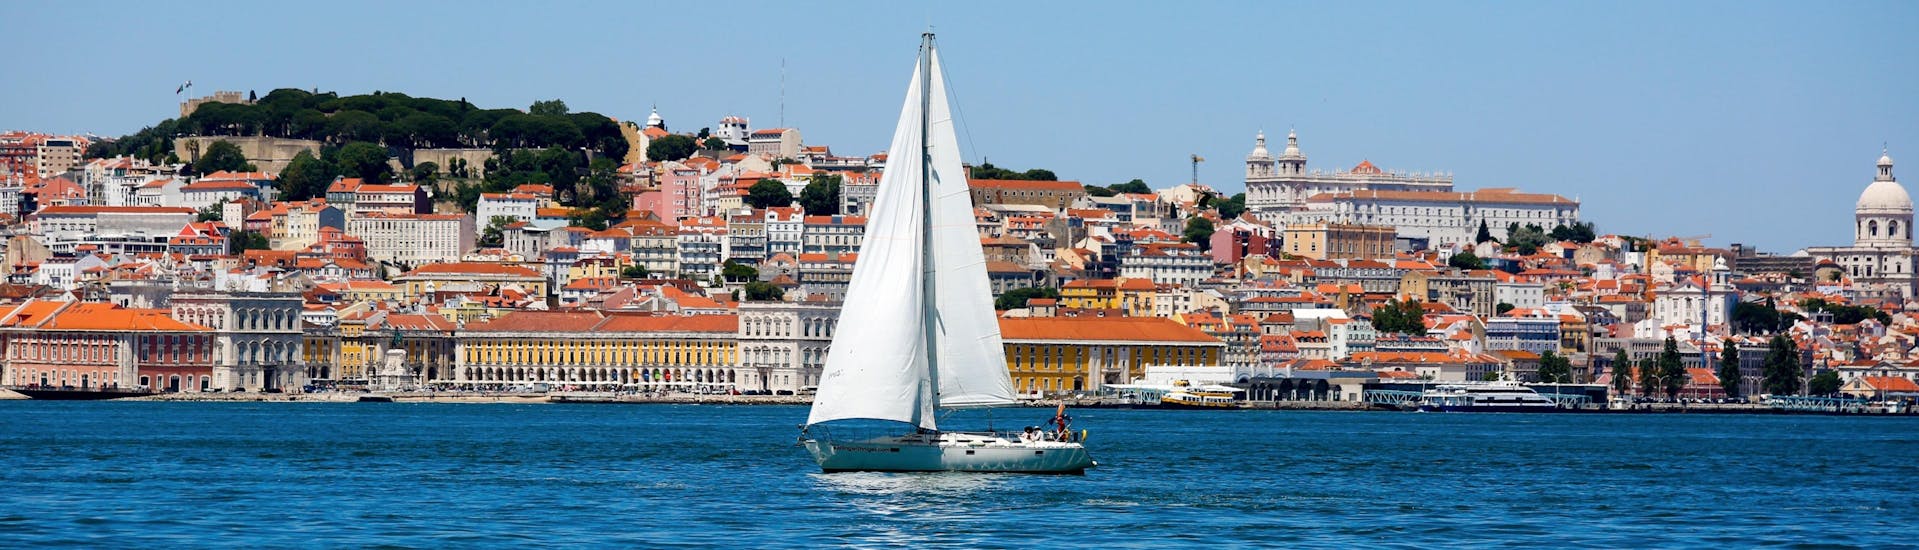 An image of a sailing boat drifting along the Tagus River during a boat trip in Lisbon.